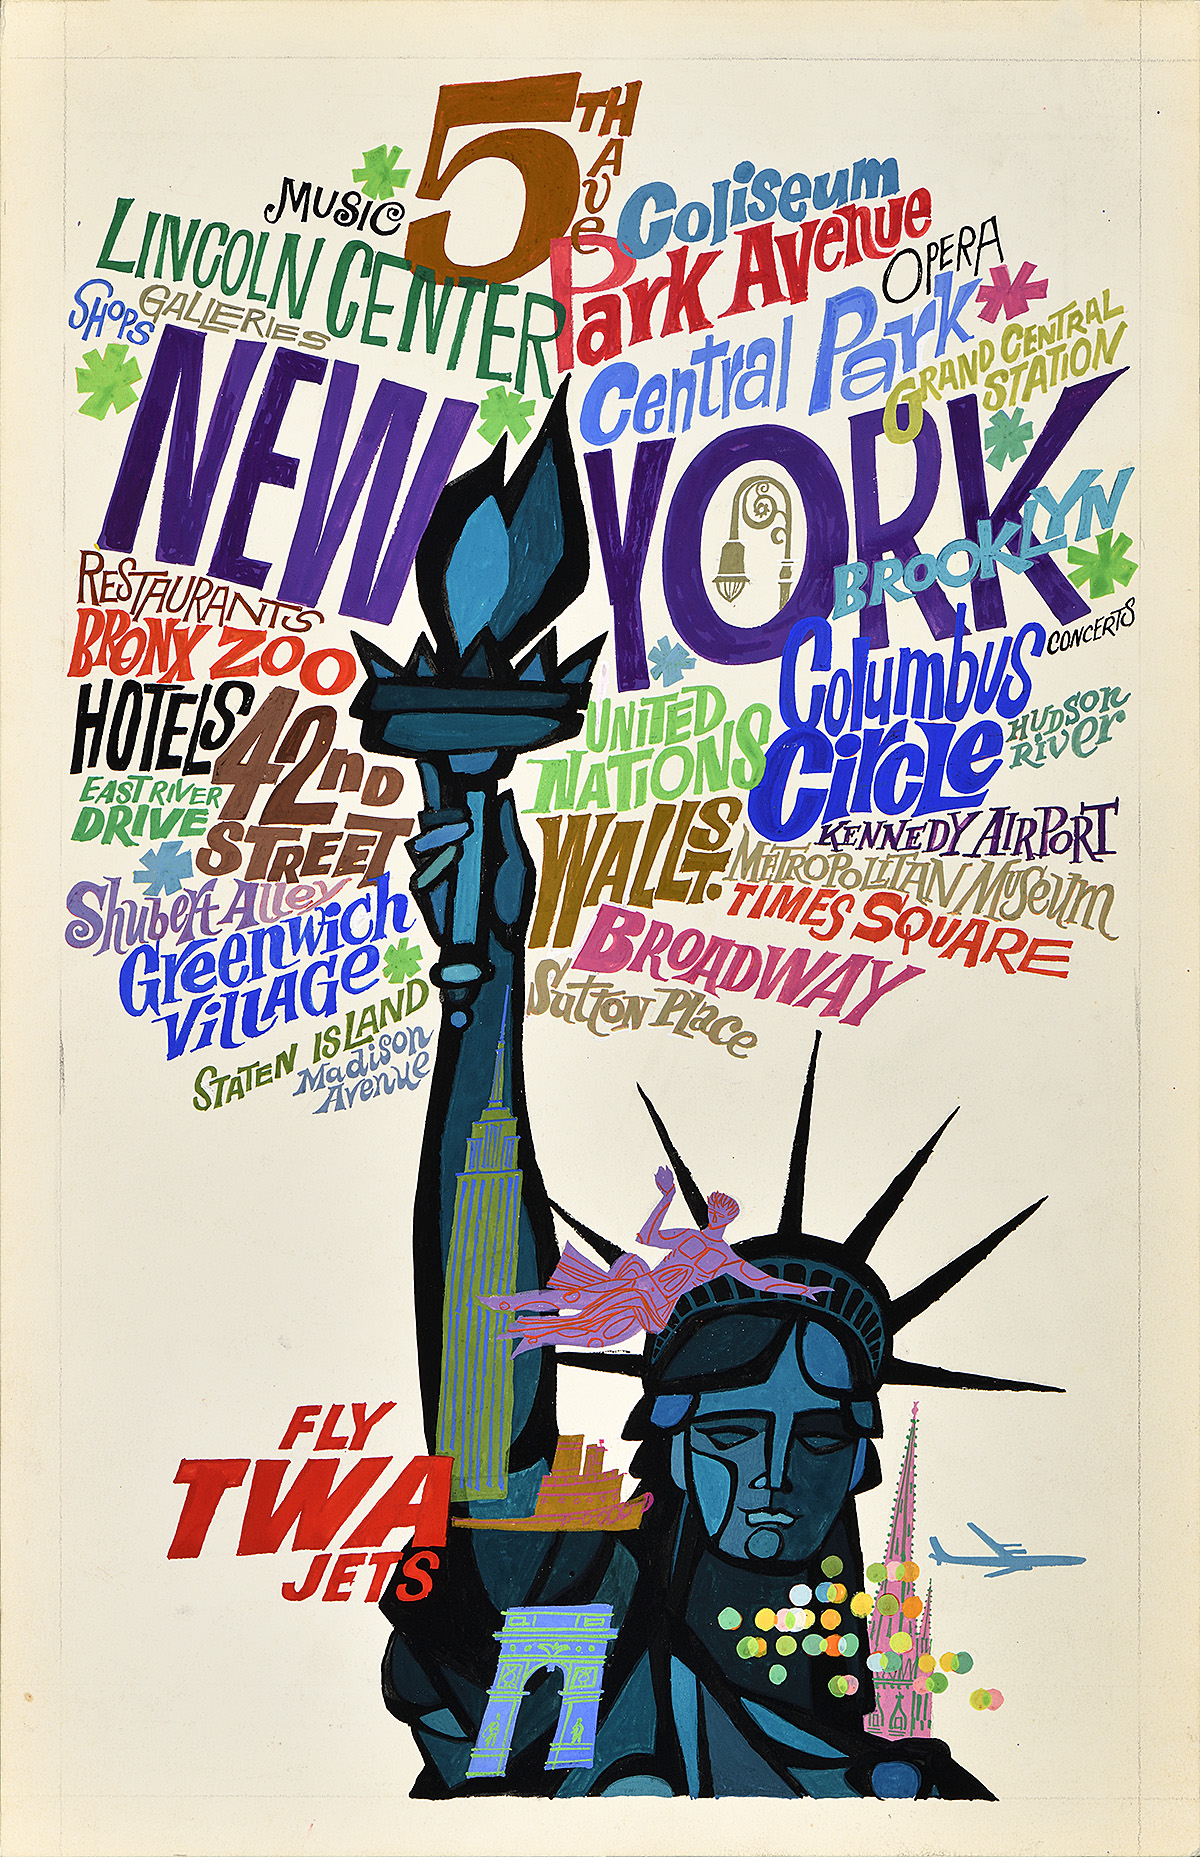 A poster of the Statue of Liberty with text of Manhattan locations surrounding her torch.